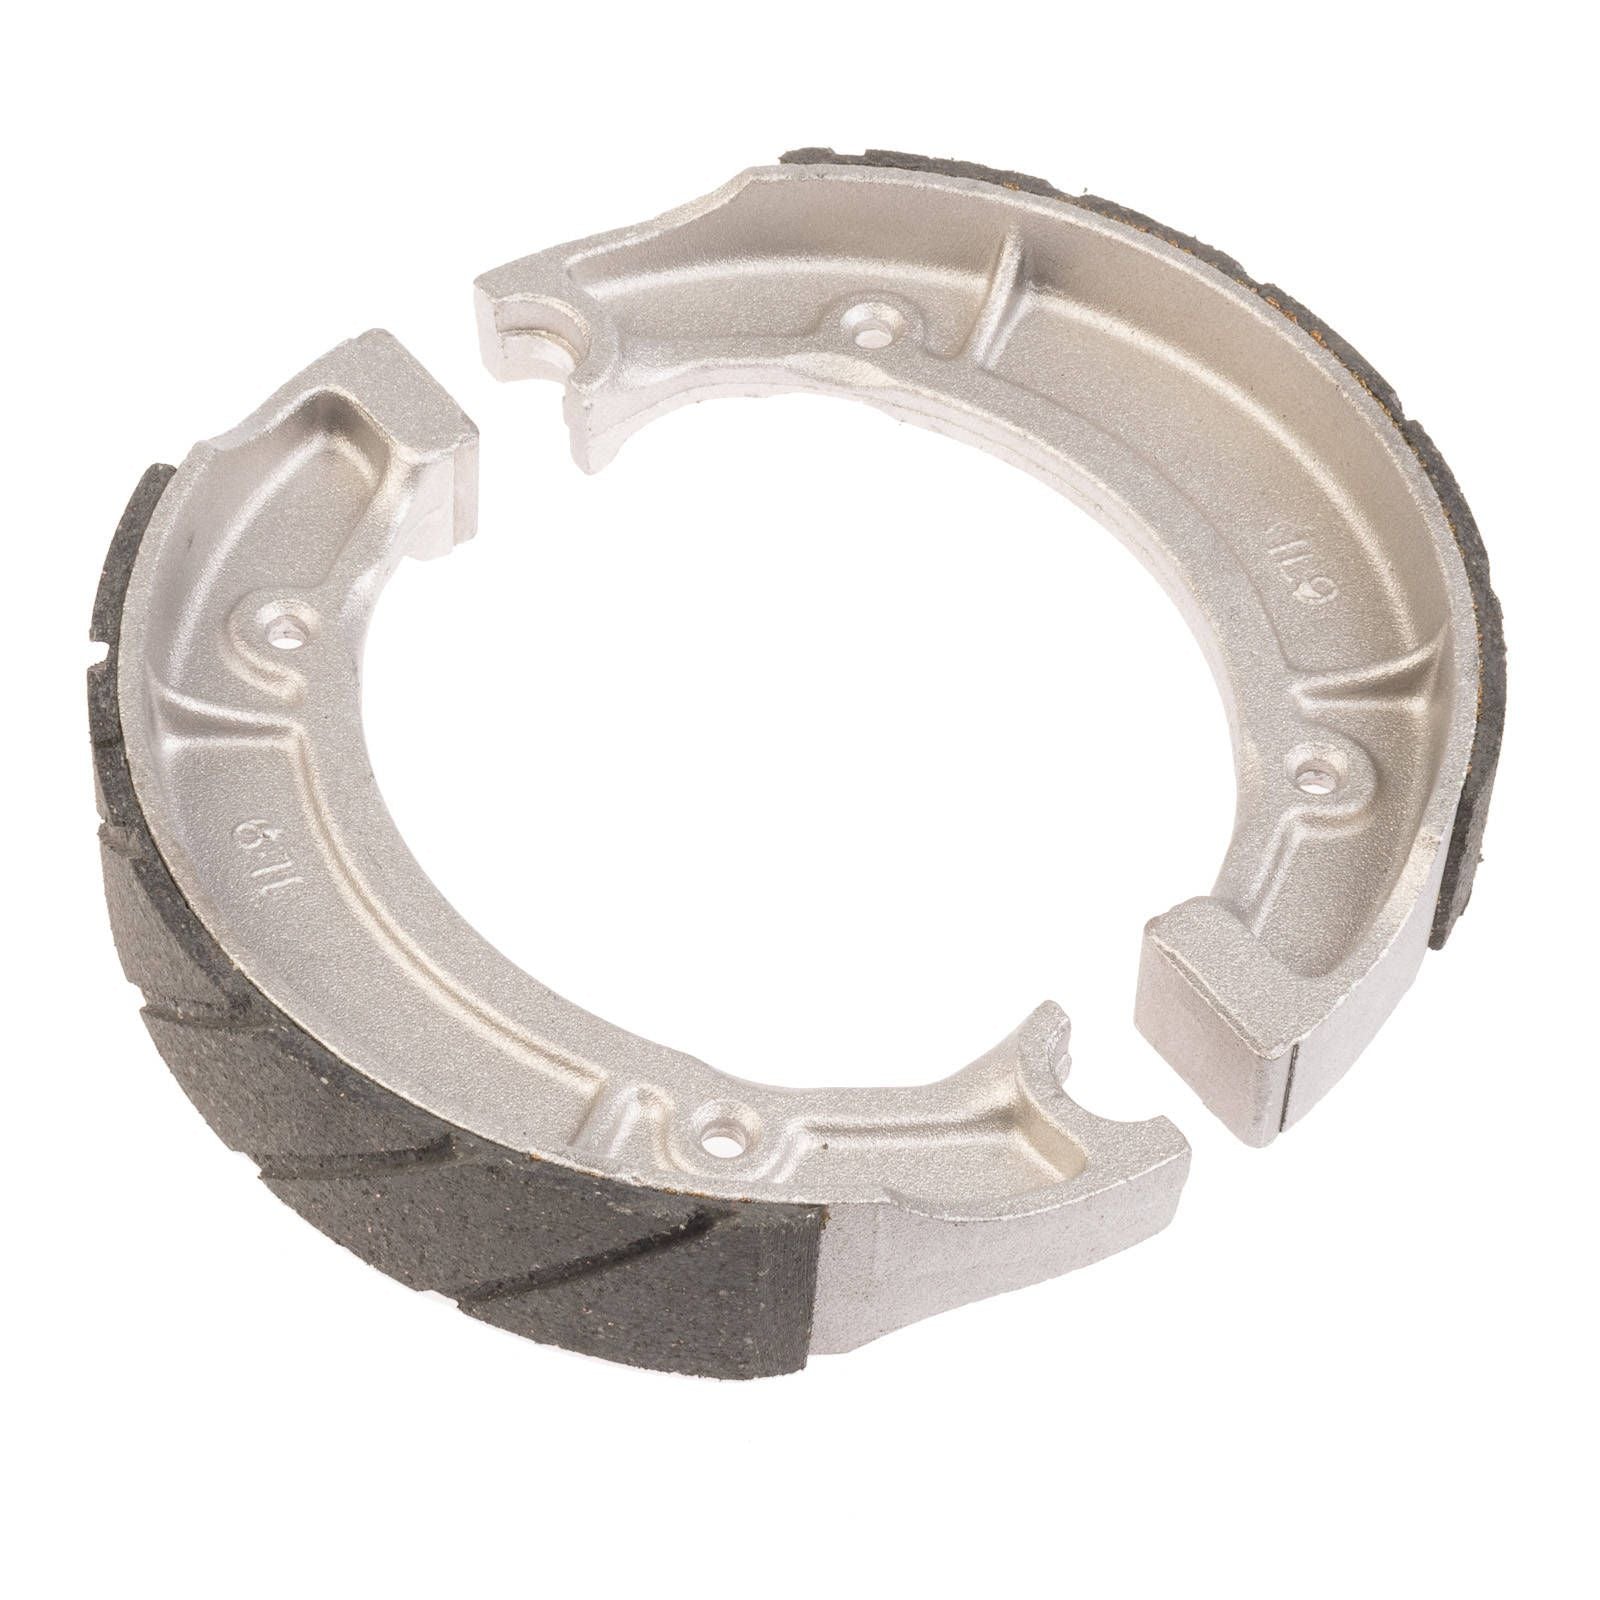 New WHITES Motorcycle Brake Shoes - Water Groove #WPBS27259